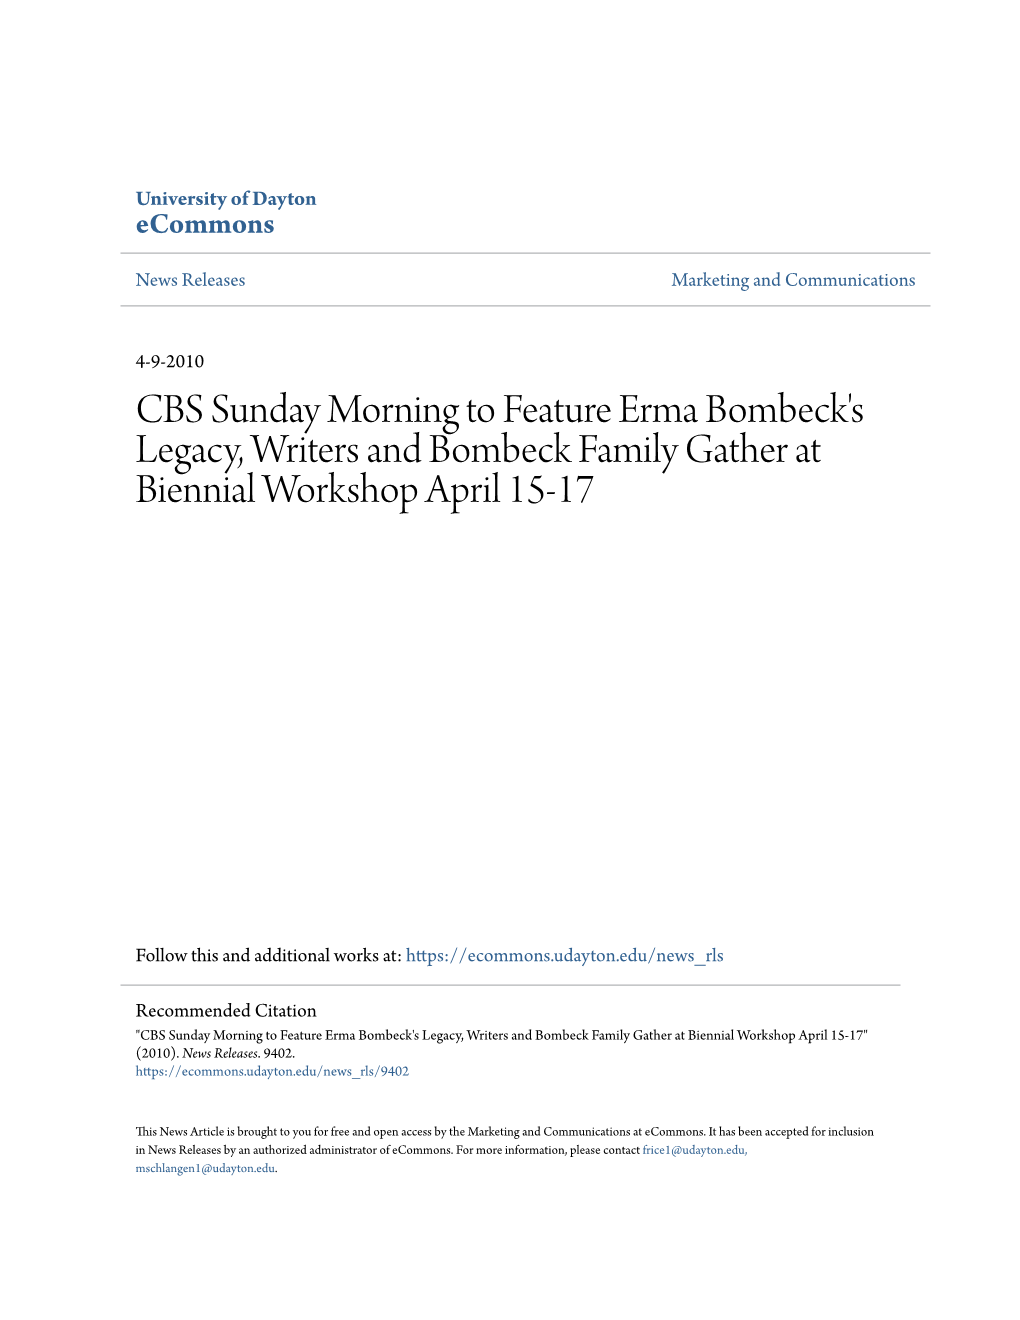 CBS Sunday Morning to Feature Erma Bombeck's Legacy, Writers and Bombeck Family Gather at Biennial Workshop April 15-17